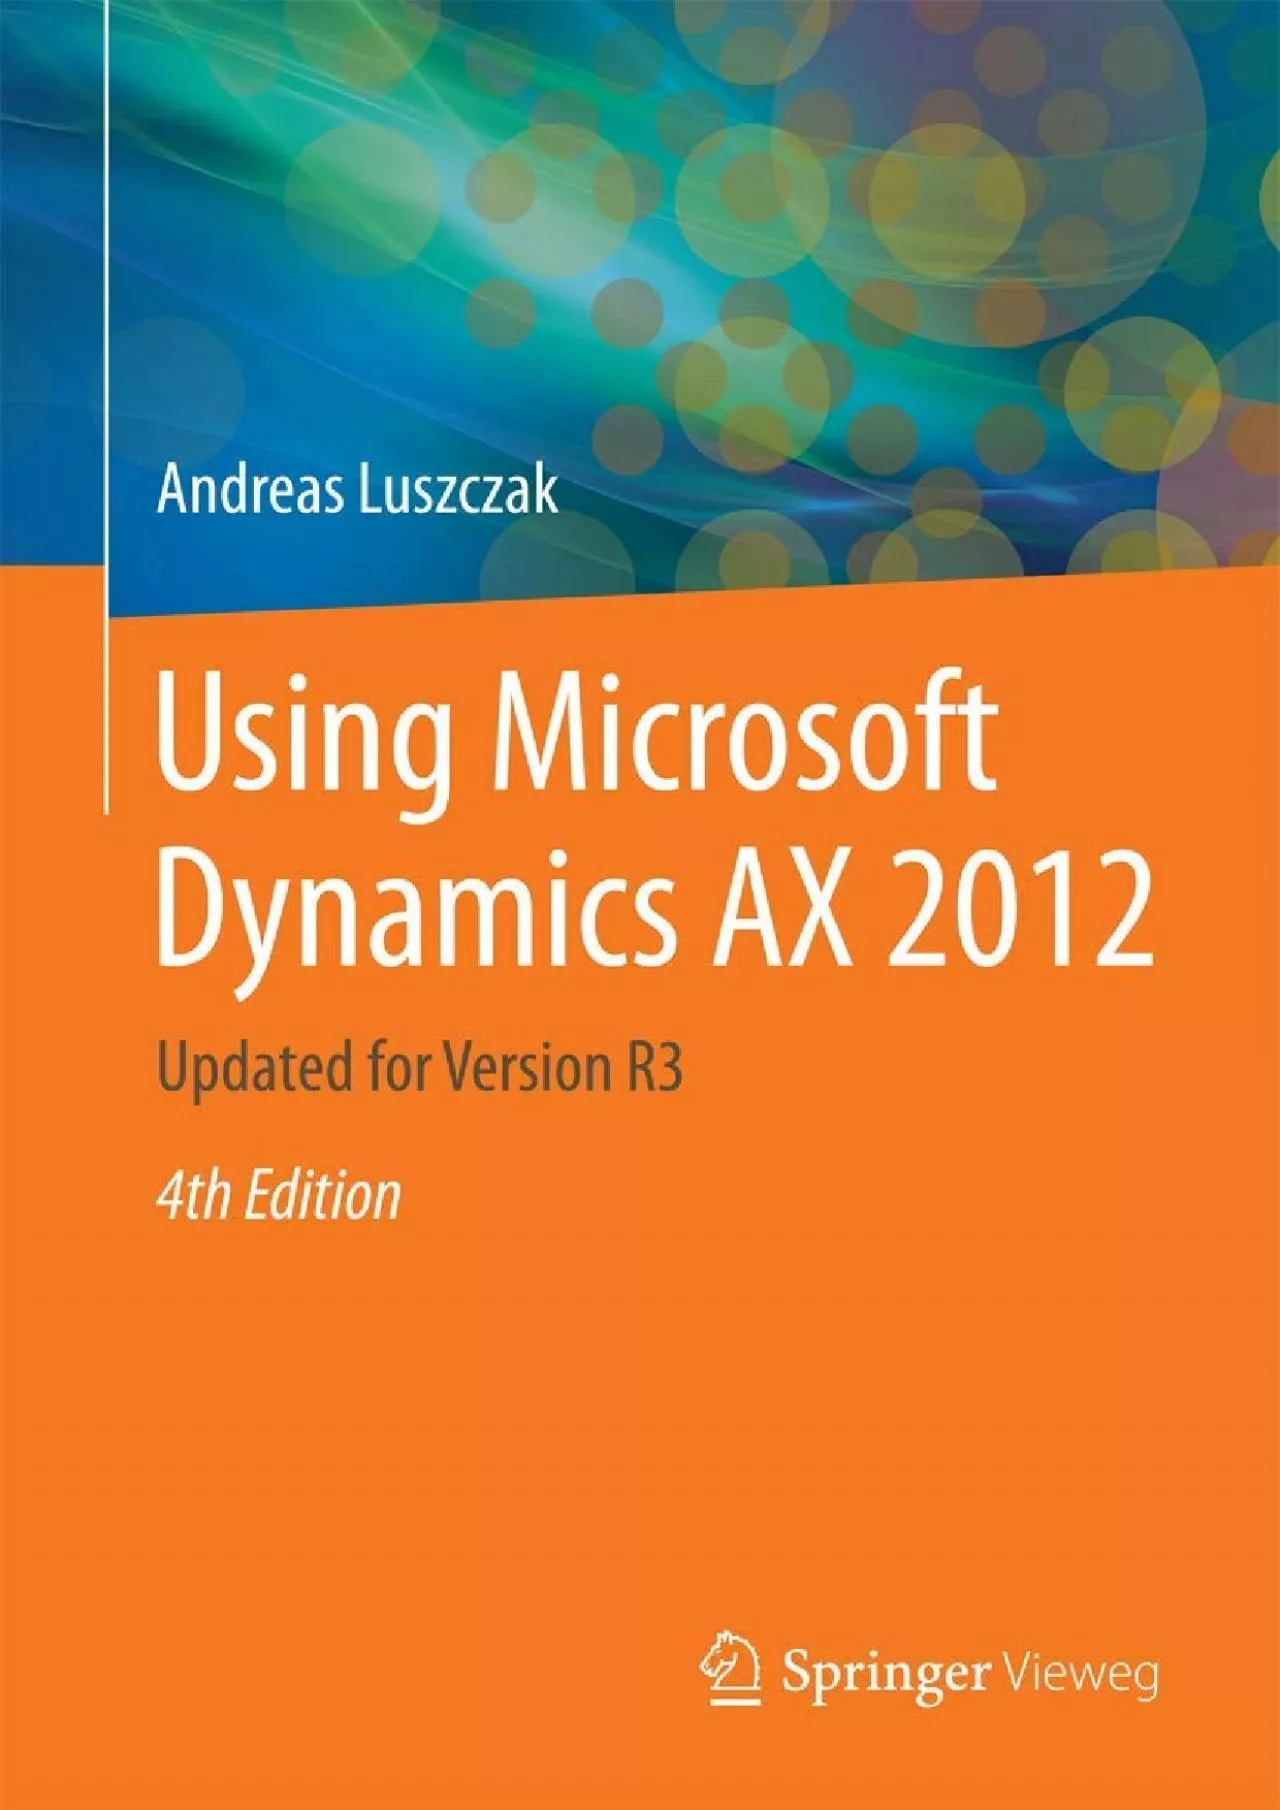 [DOWLOAD]-Using Microsoft Dynamics AX 2012: Updated for Version R3